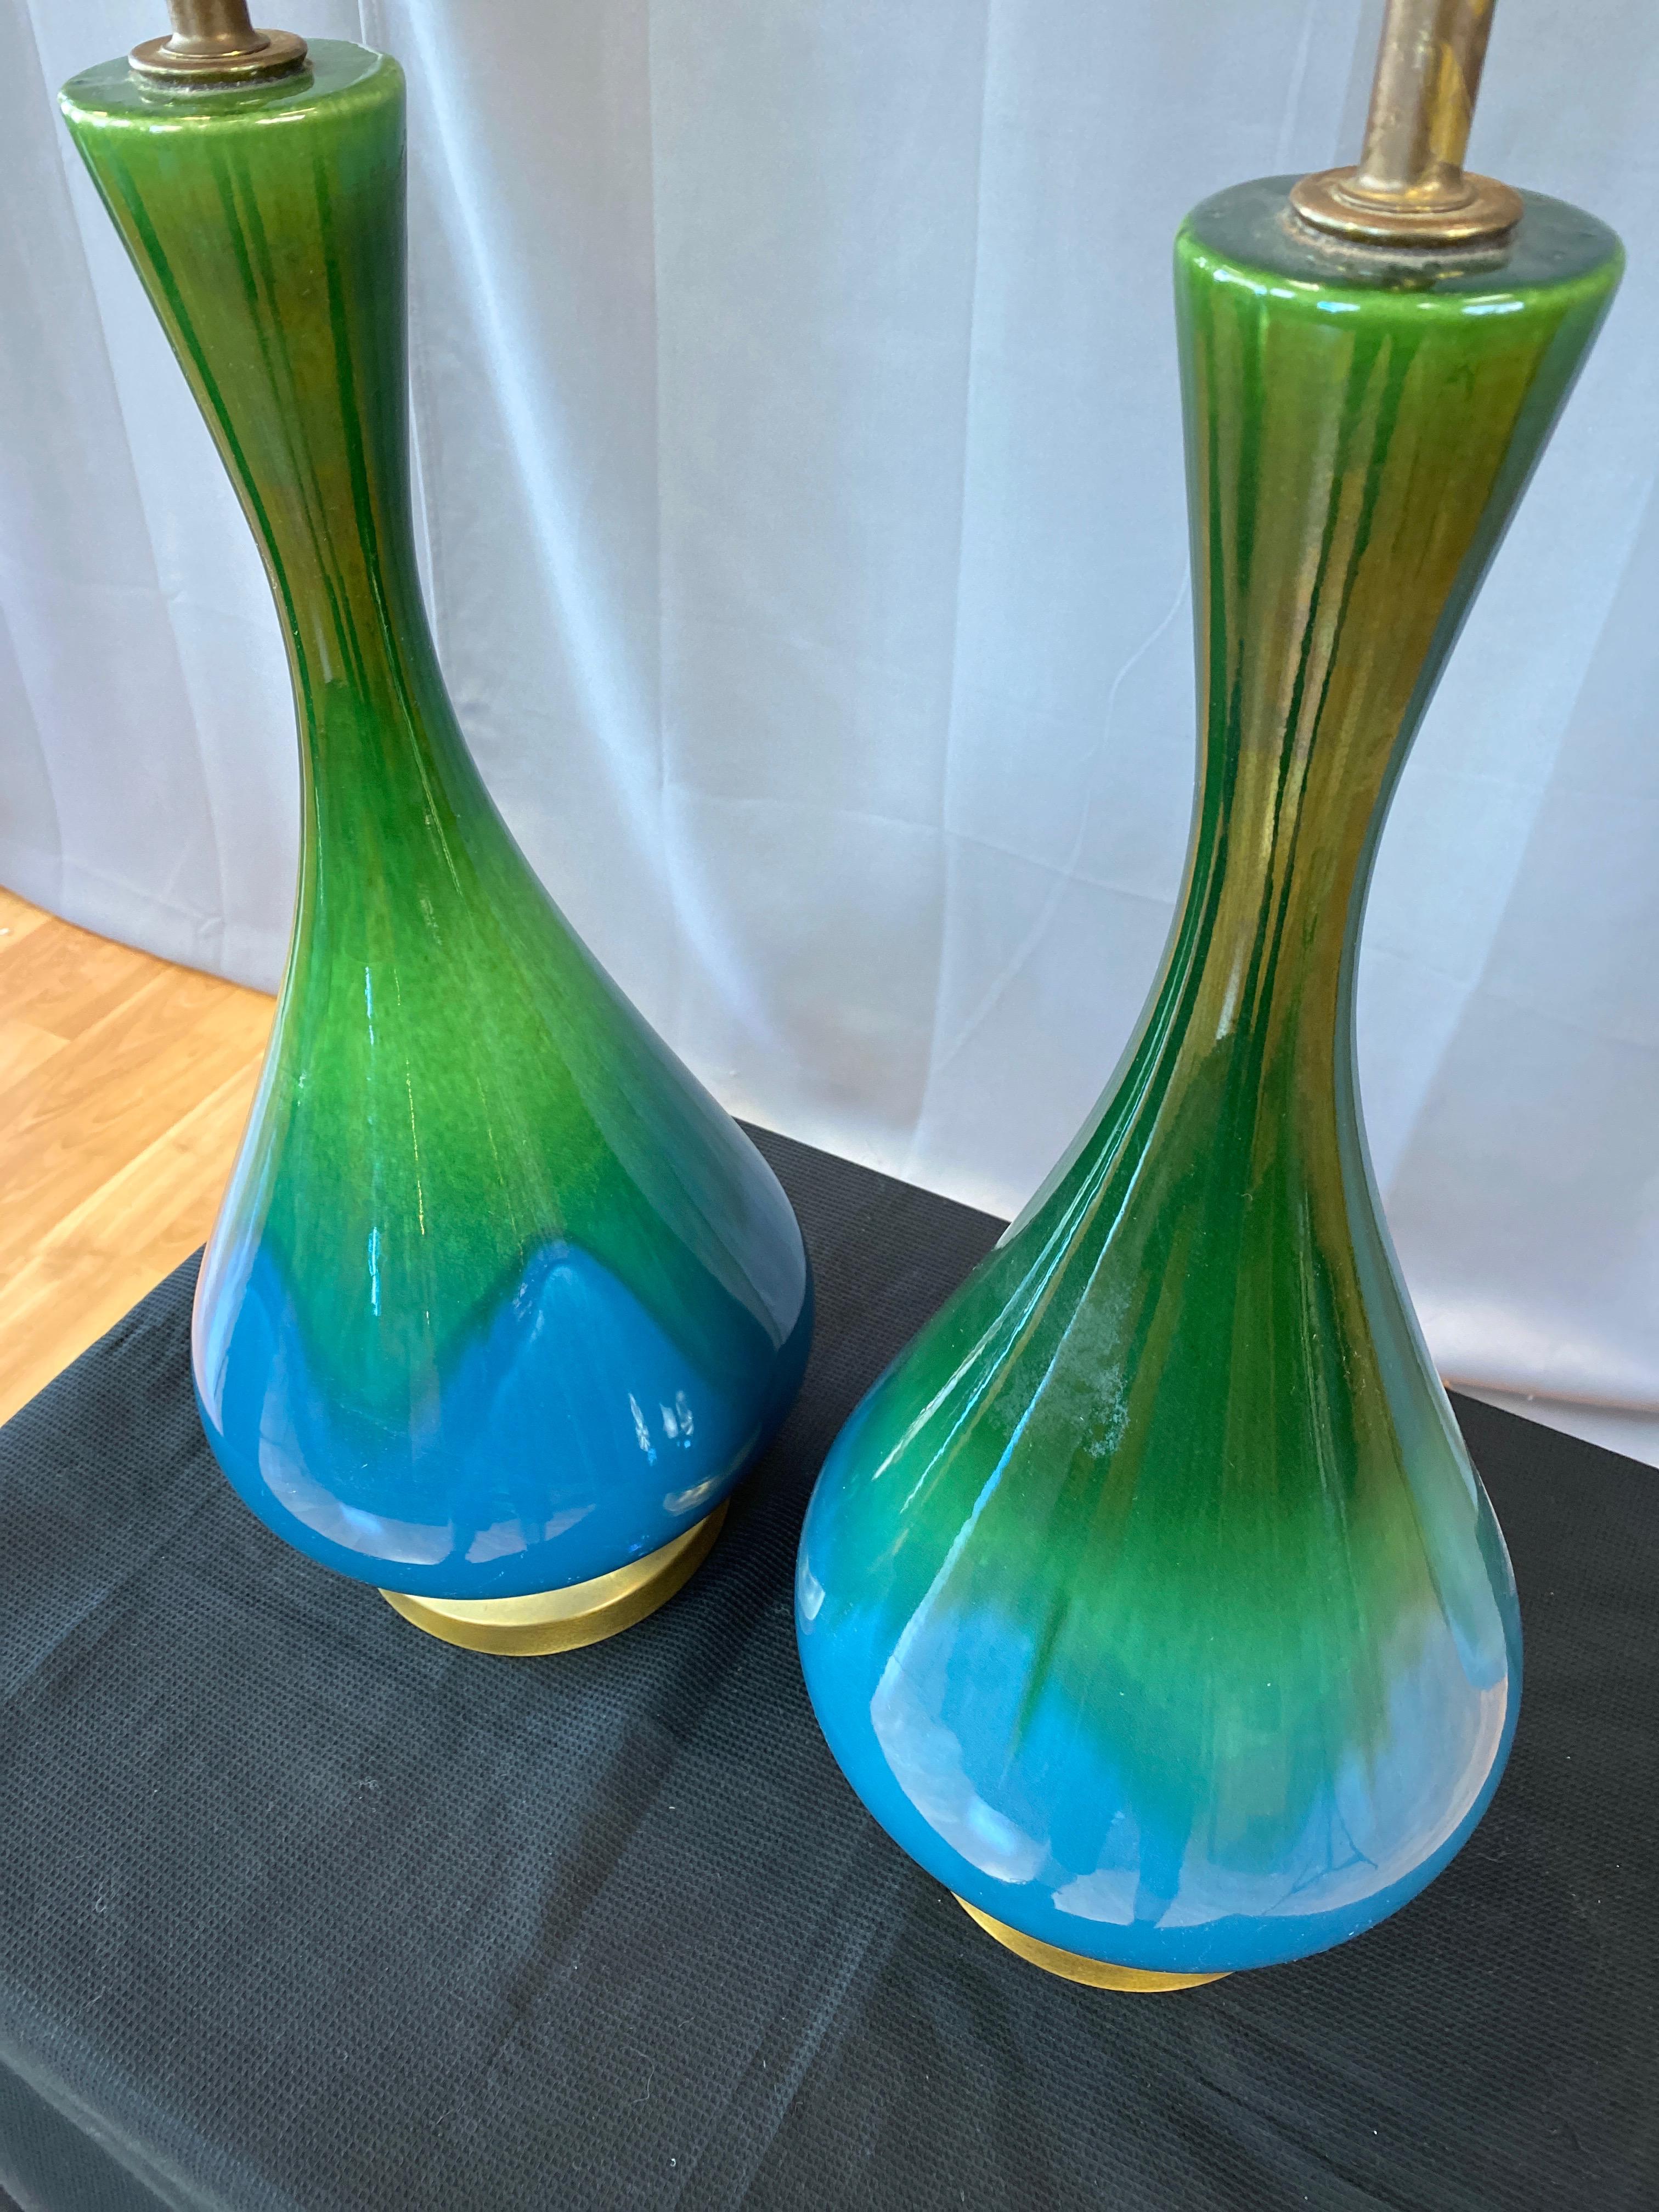 American Pair of Blue-Green Ombré Glaze Ceramic and Brass Table Lamps with Shades, 1950s